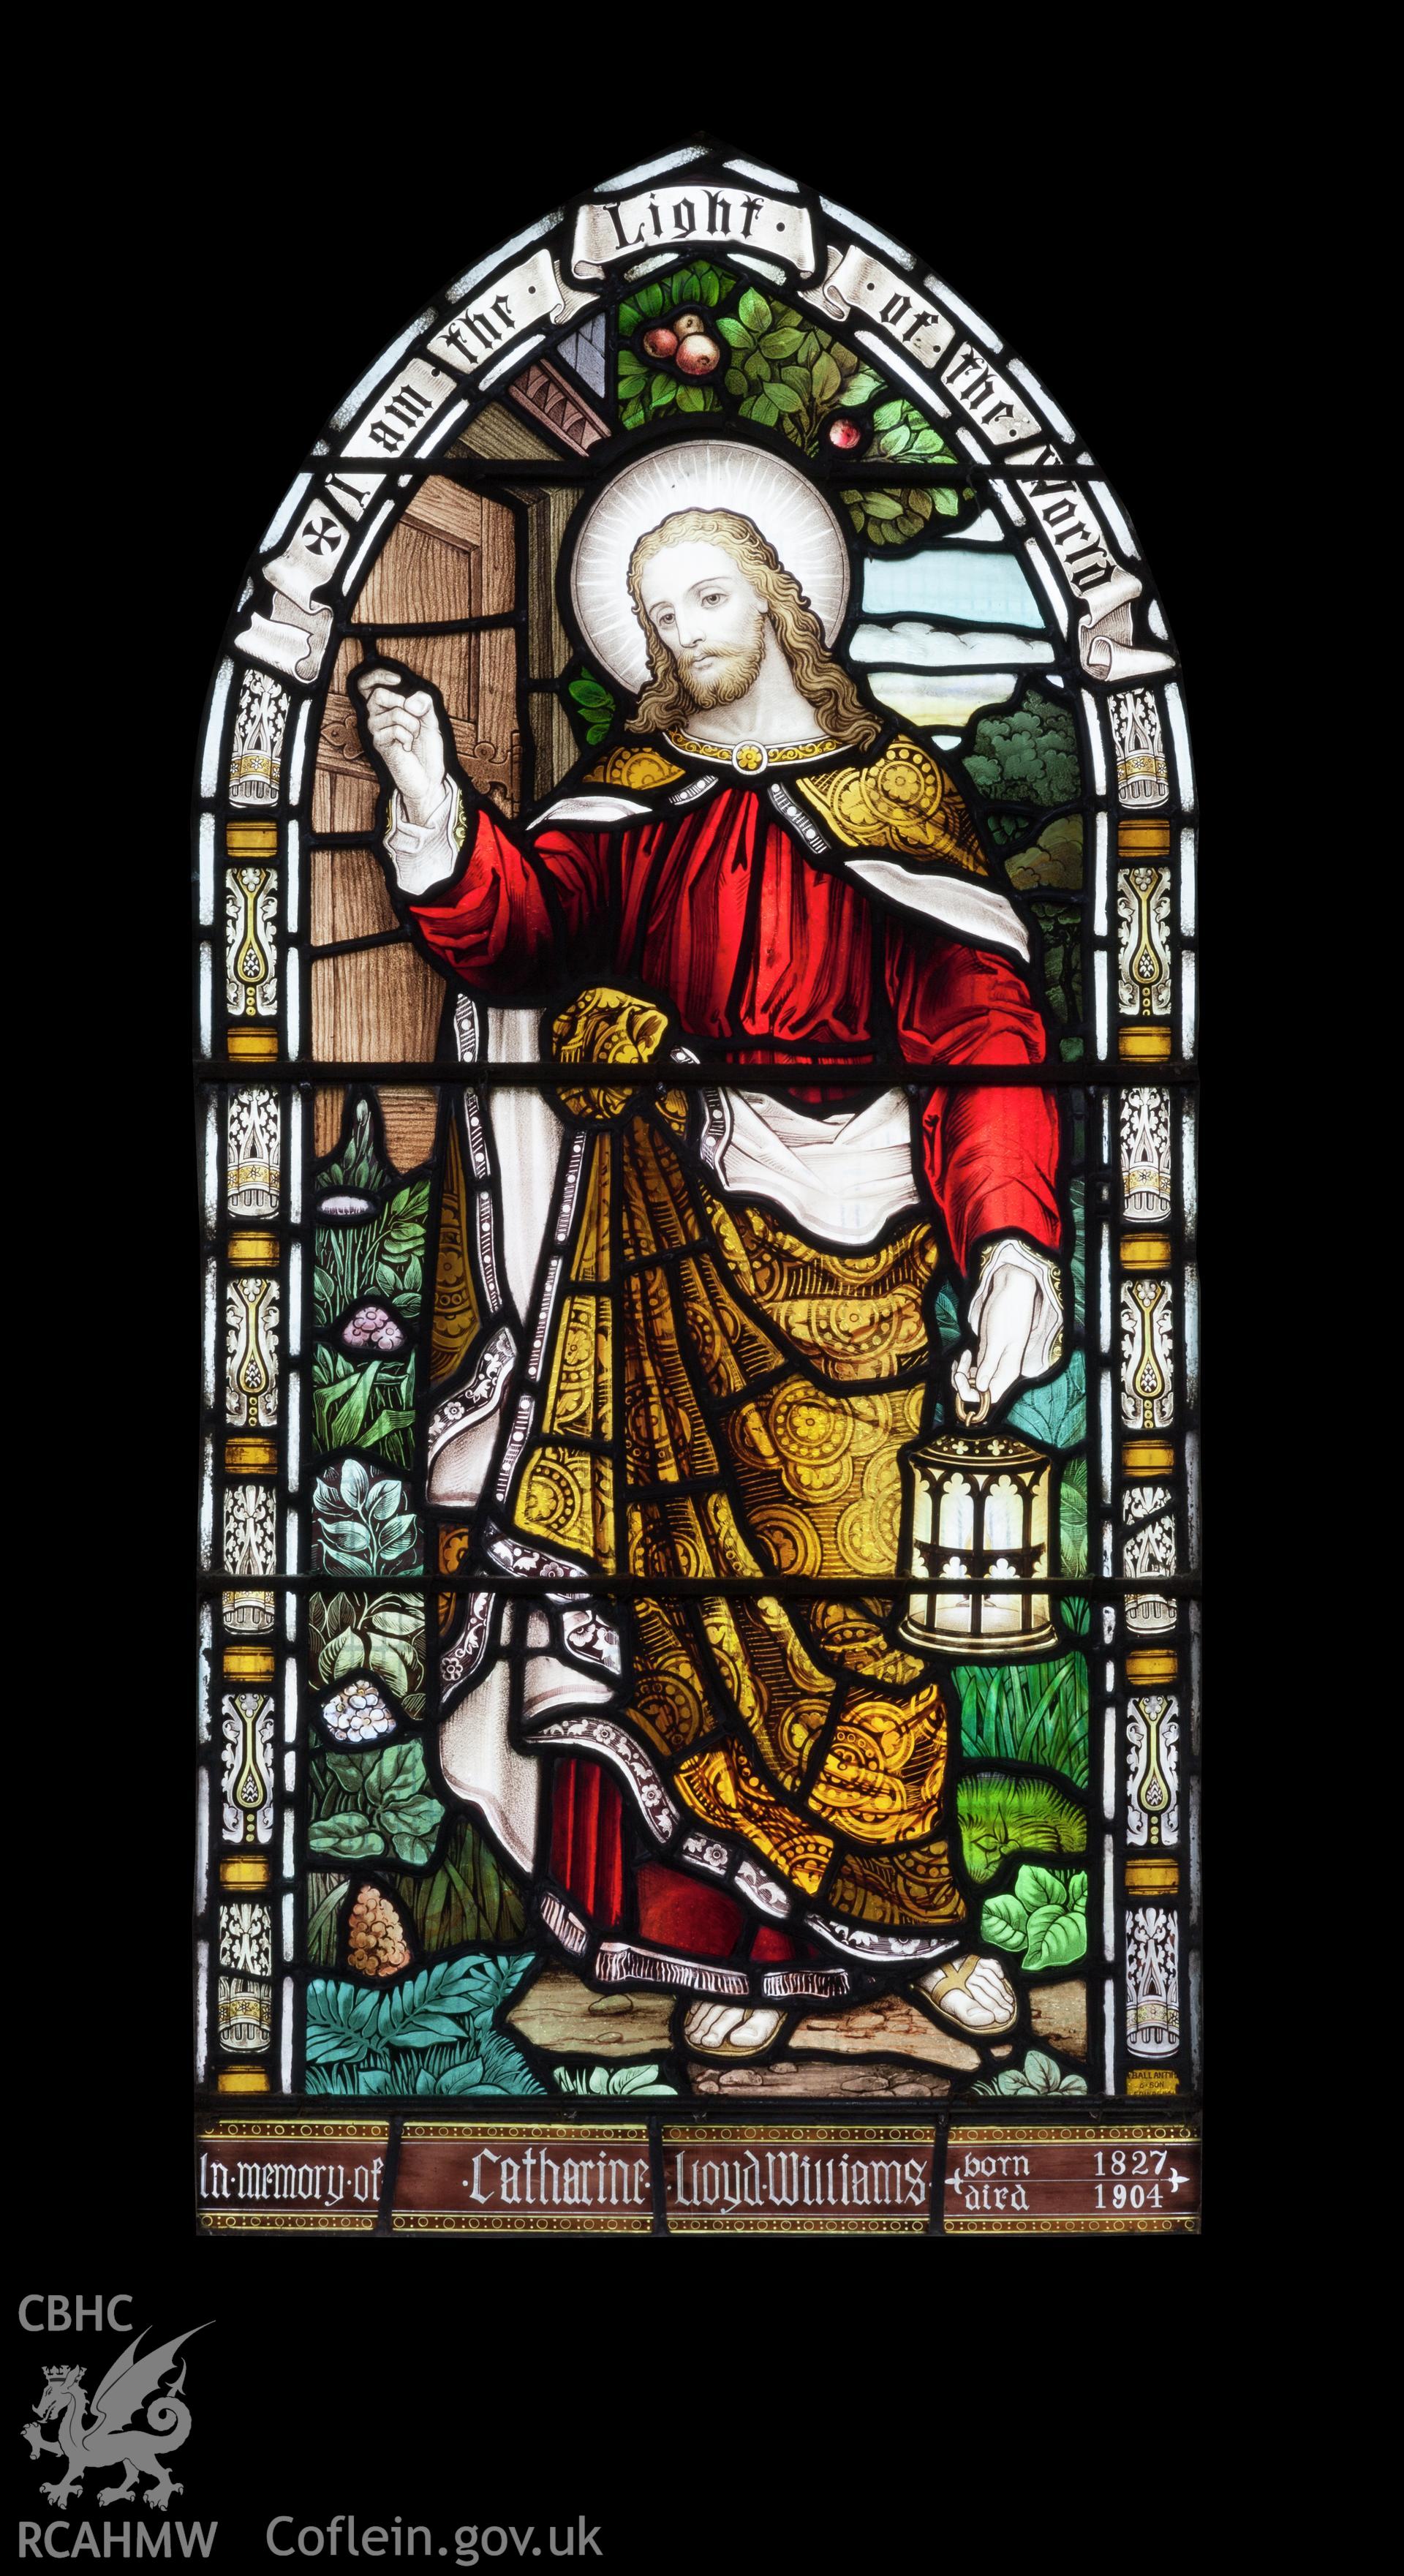 Catherine Lloyd-Williams stained glass memorial window